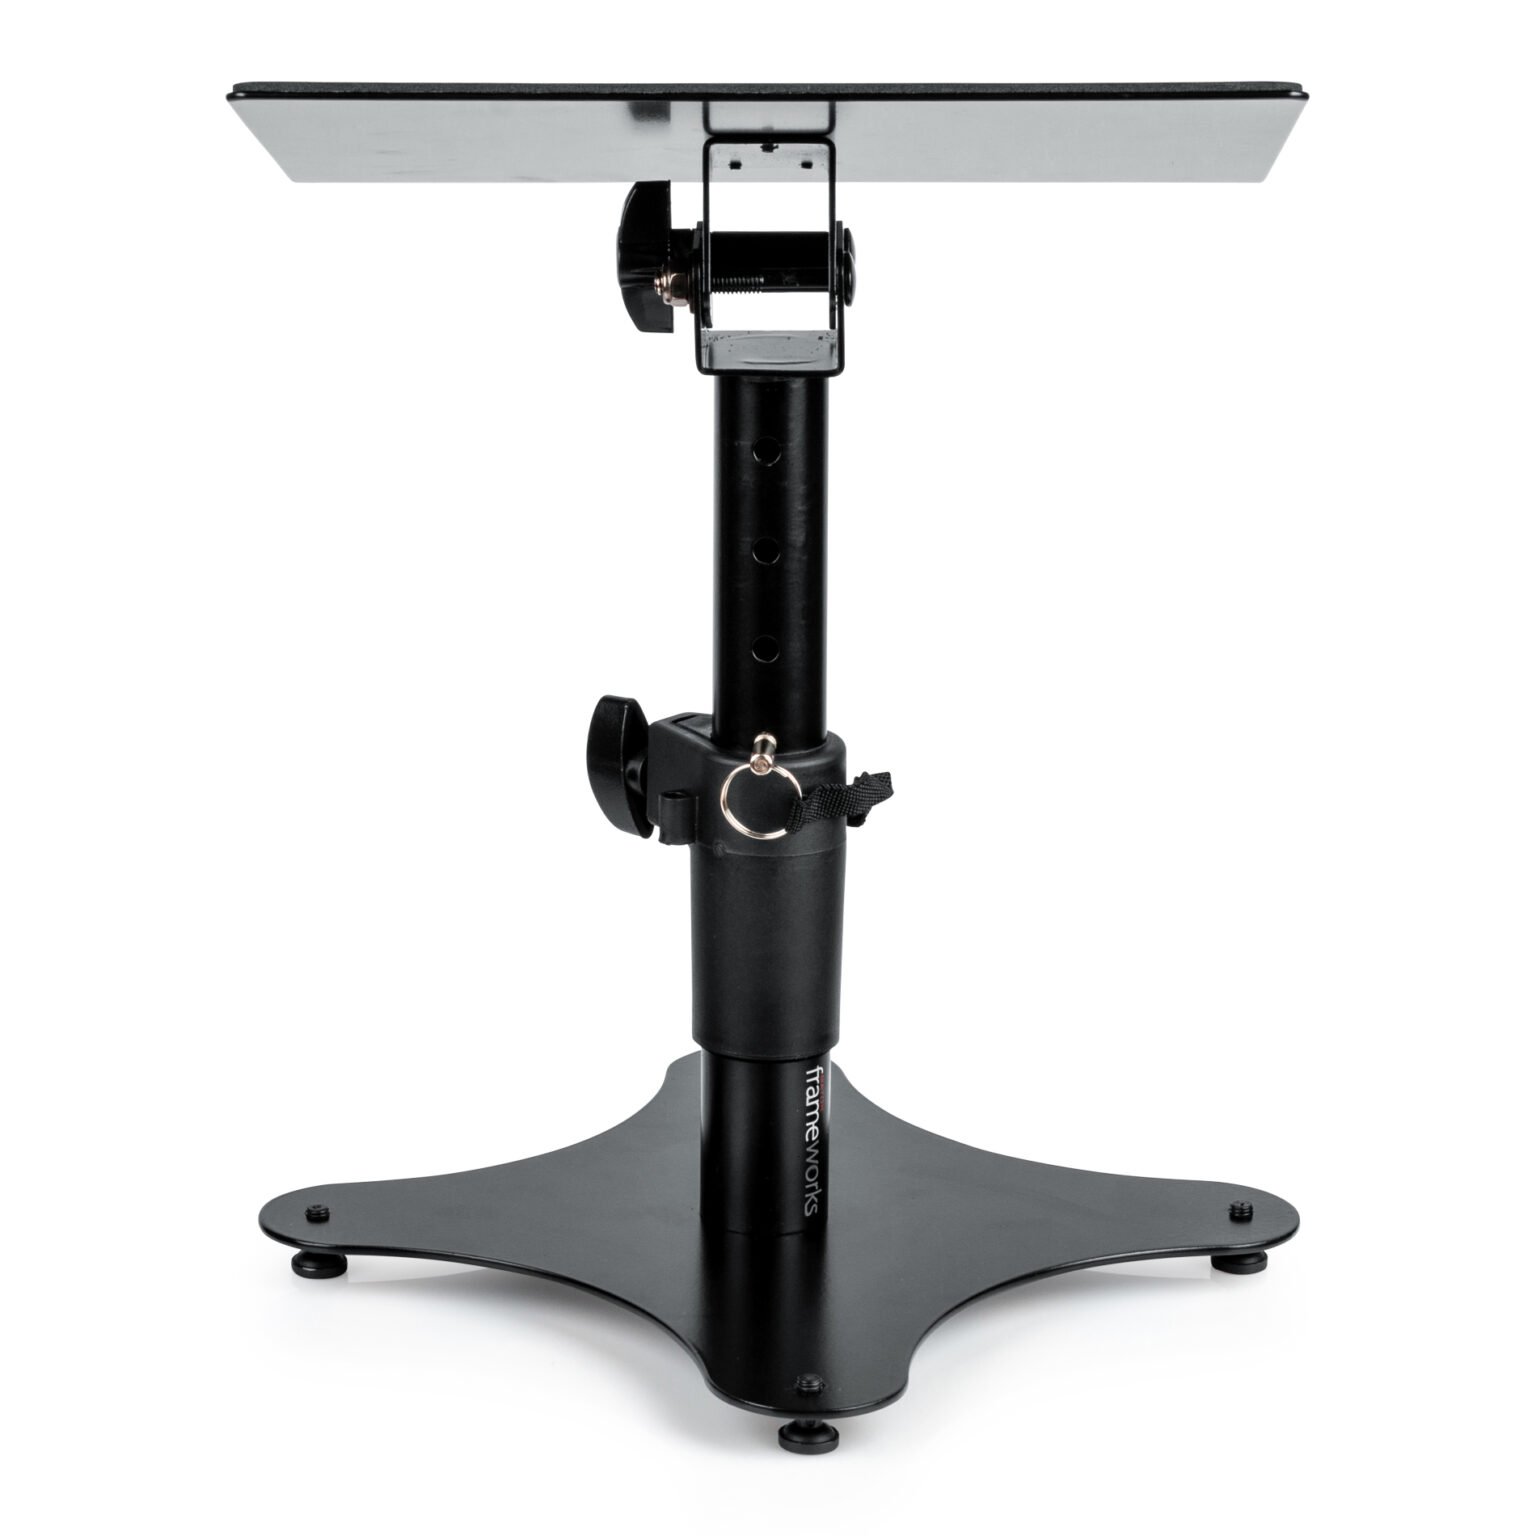 Gator Frameworks GFWLAPTOP1500 Tripod Laptop and Projector Stand